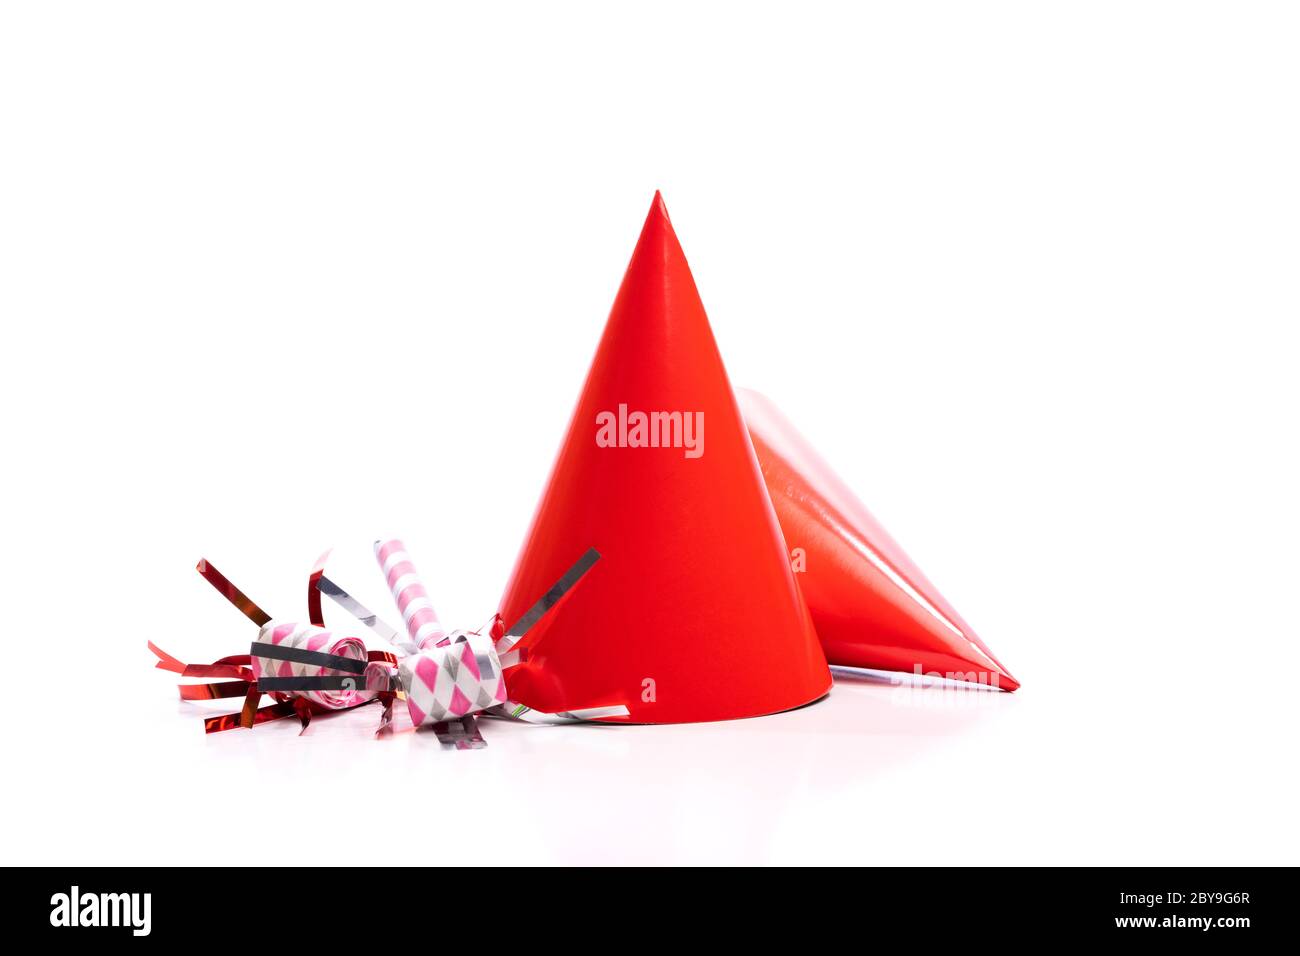 Red birthday hats and noise-makers on a white background. Stock Photo